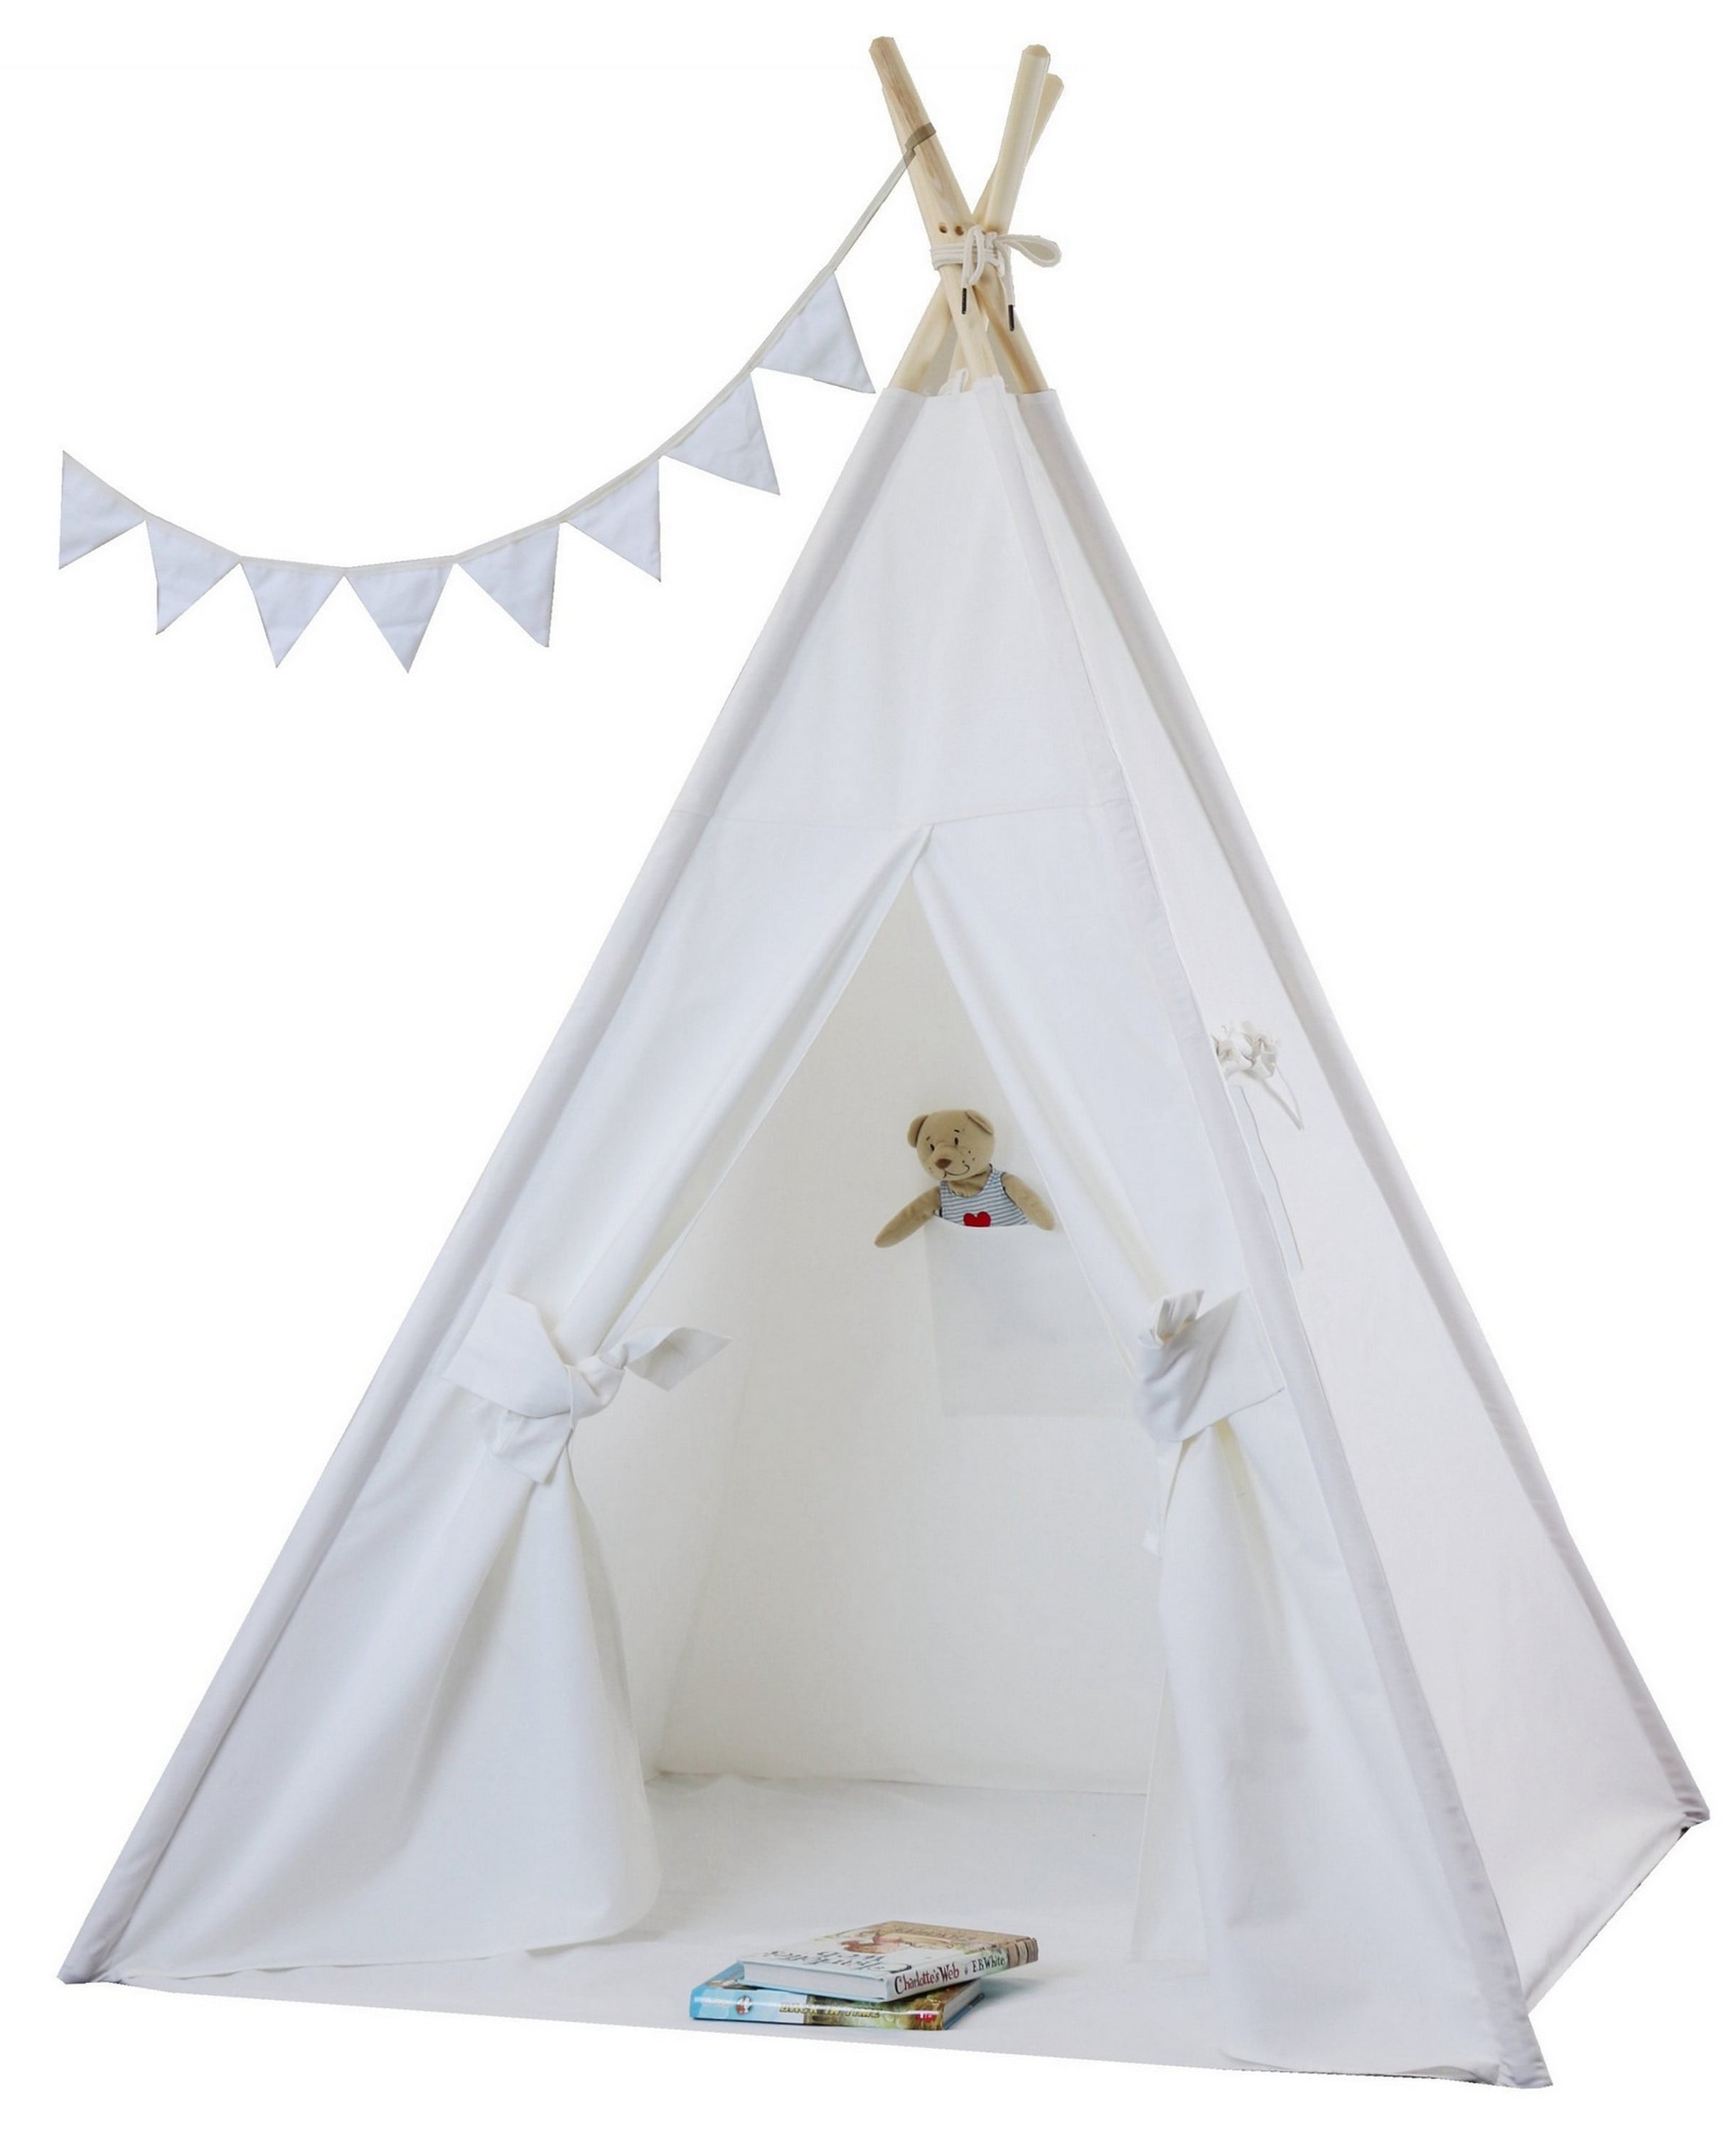 Asweets Indoor Baby Kids Foldable Activity Toy Teepee Play Tent with Llama Mat 